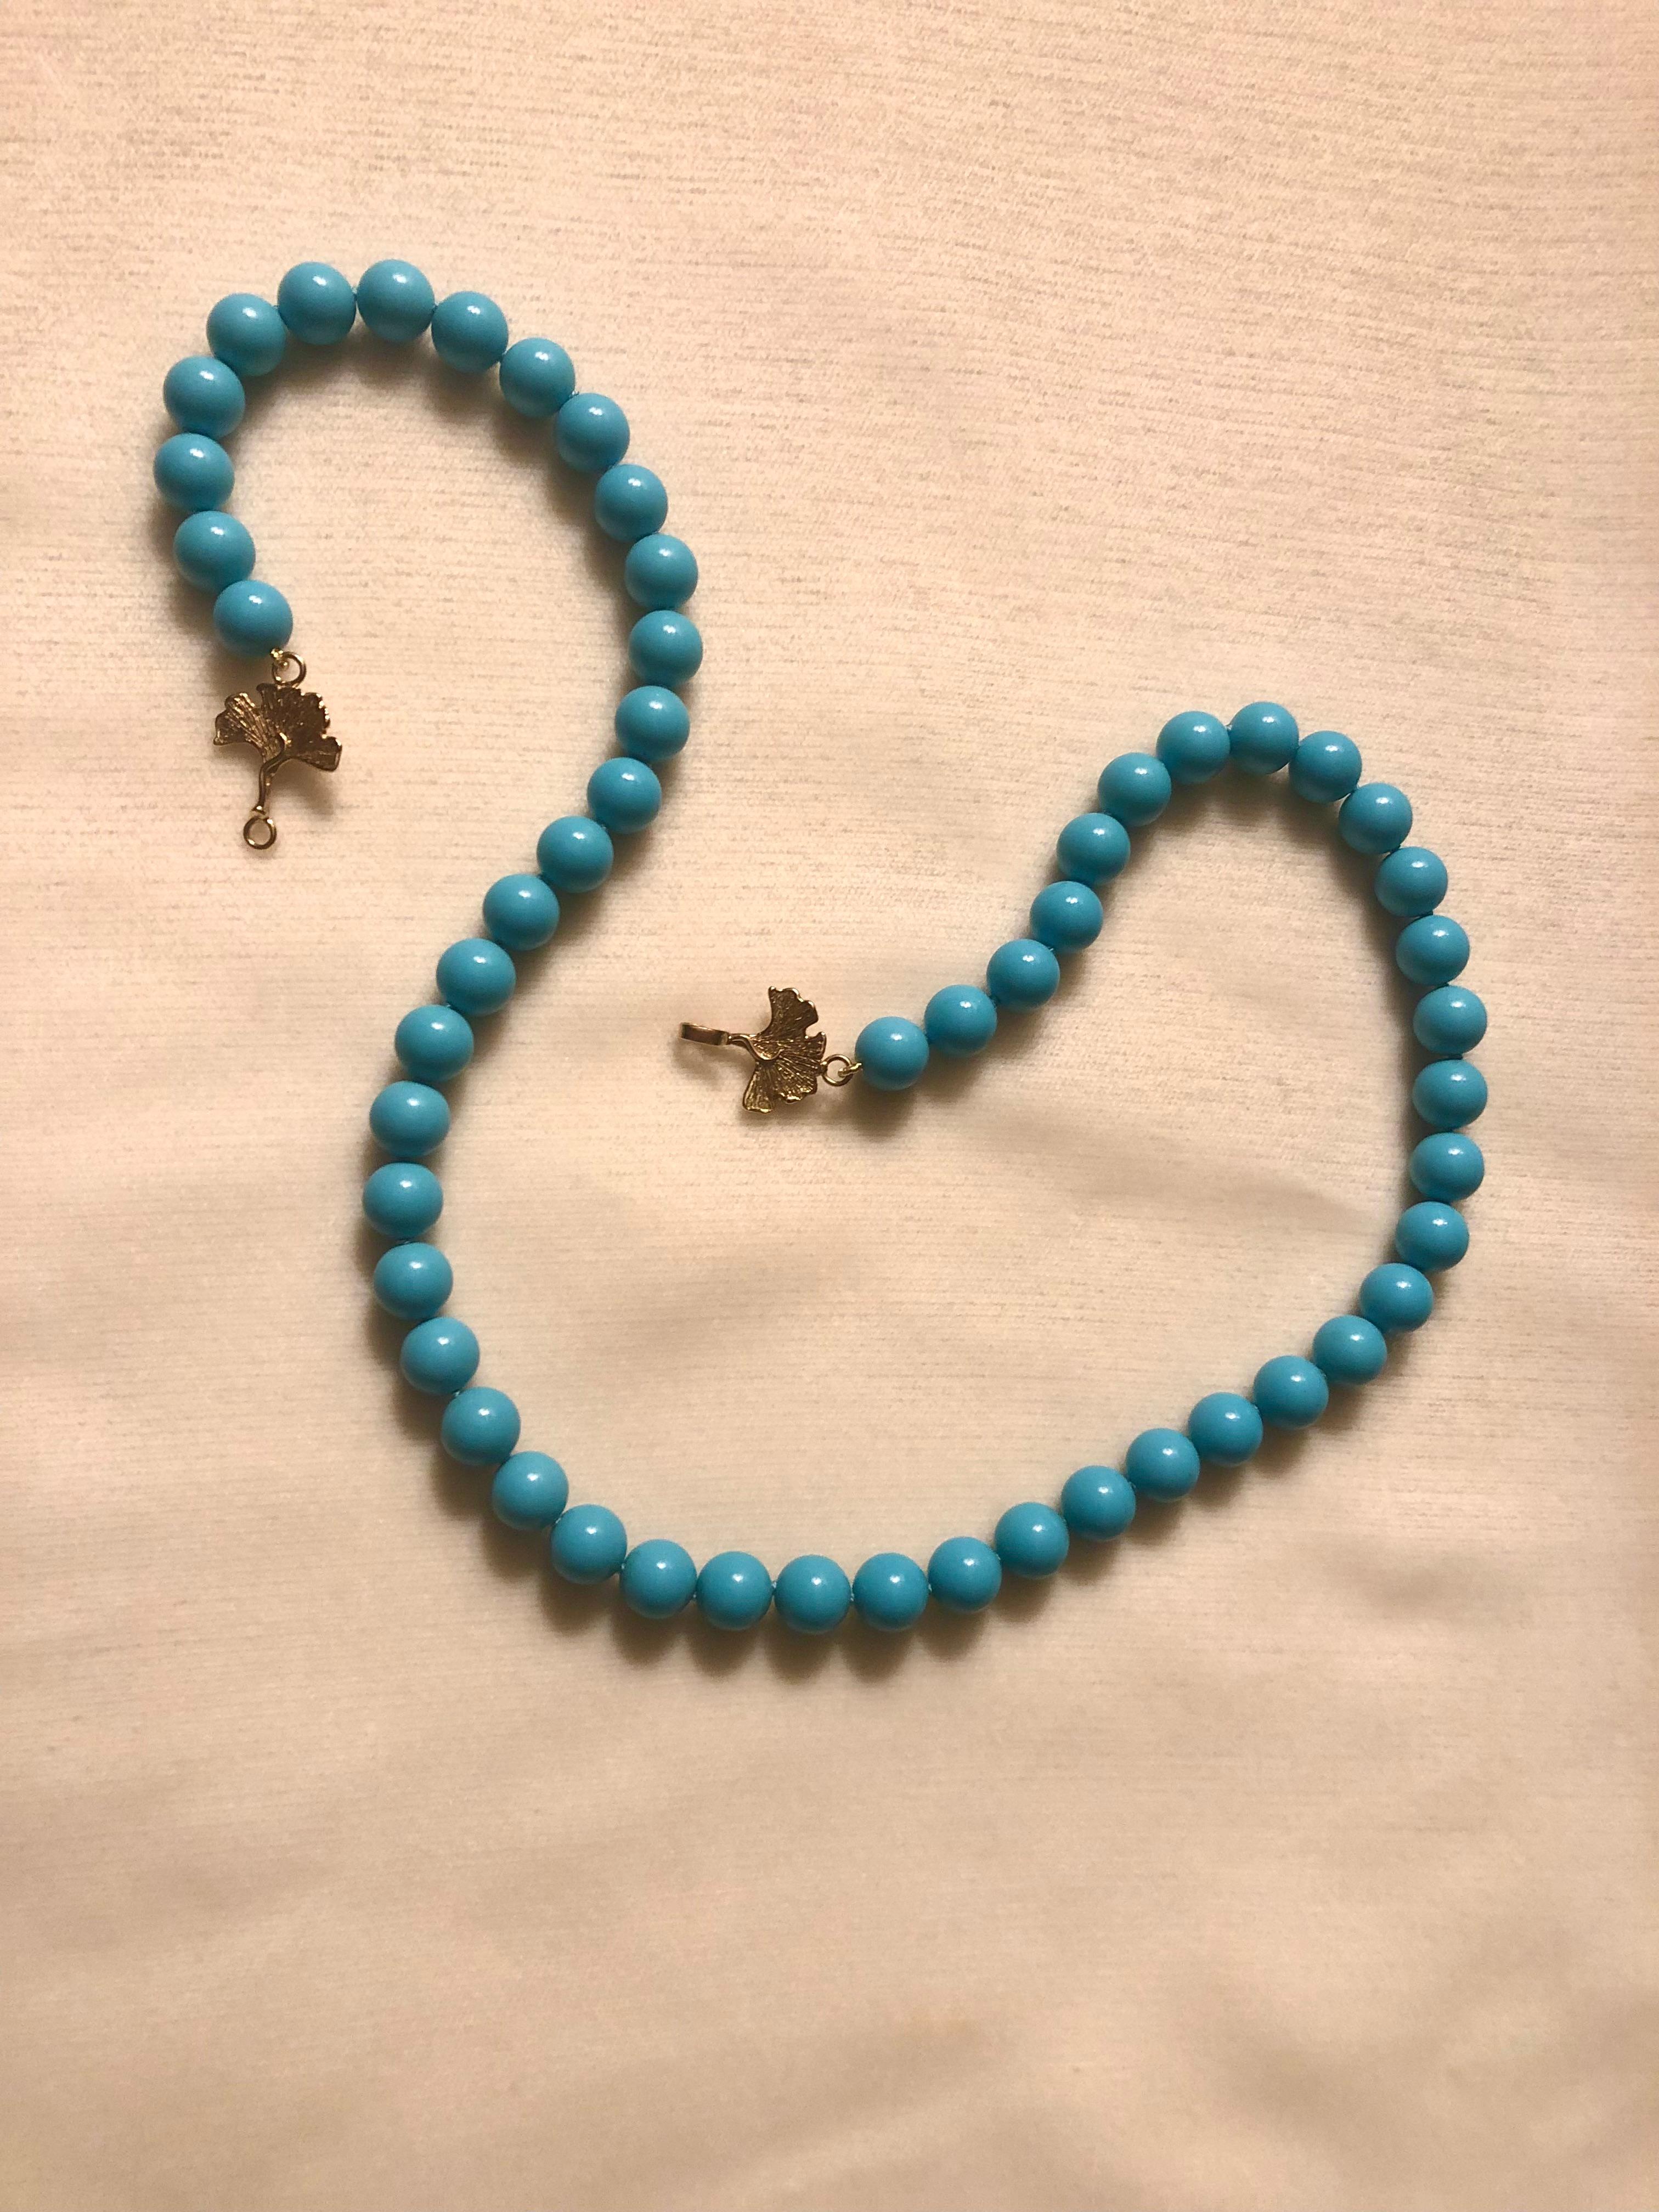 Bead Sleeping beauty turquoise beads with 14kt gold clasp For Sale